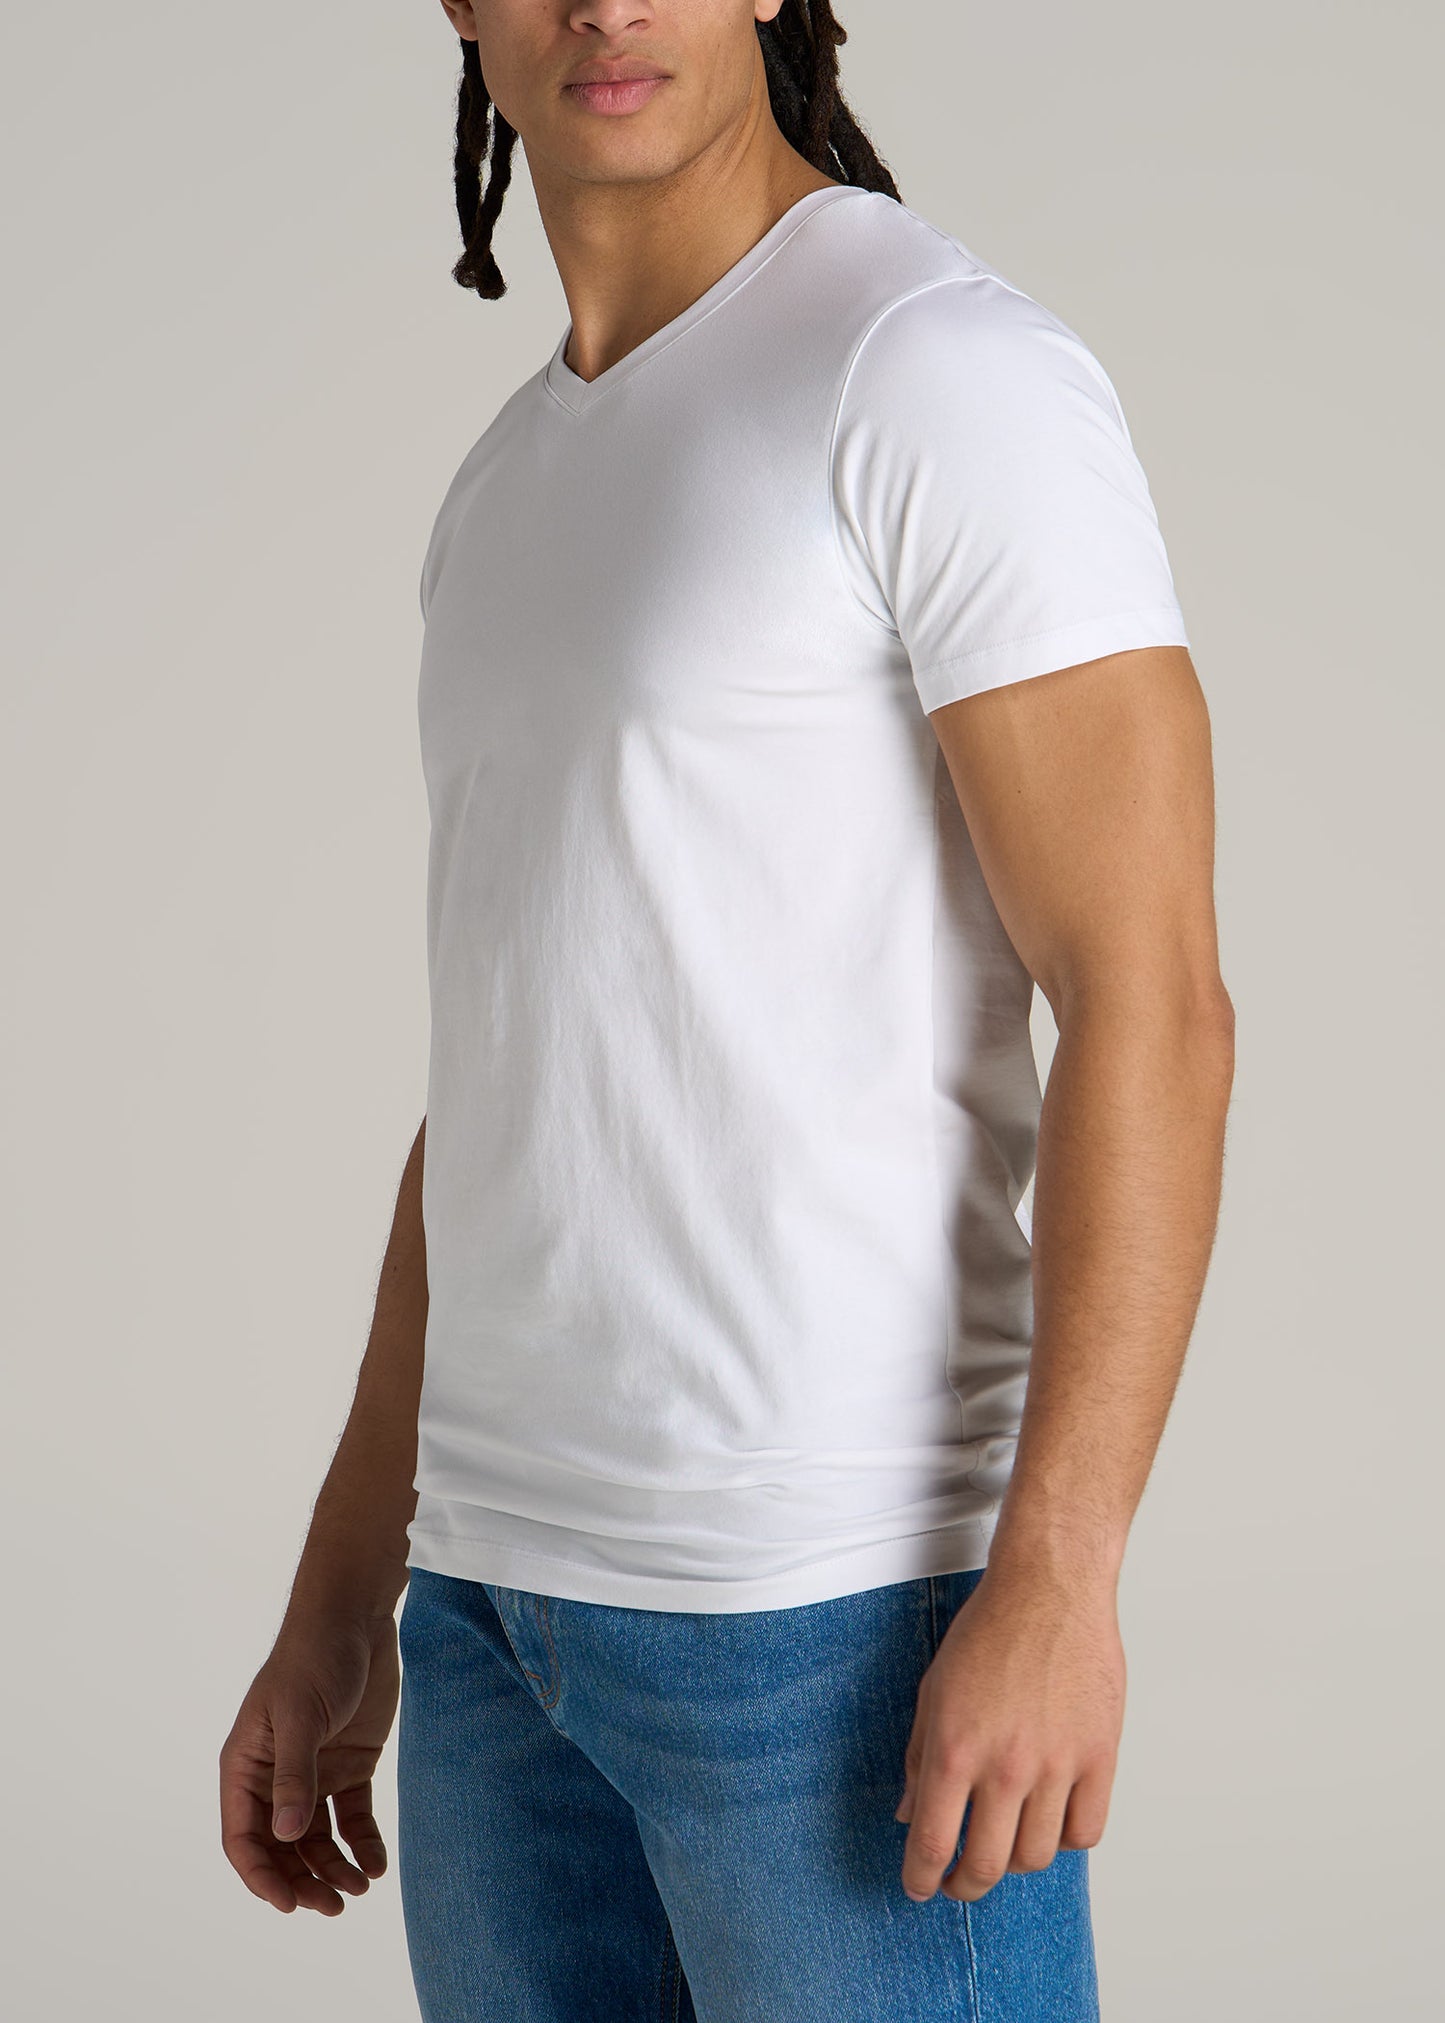 Stretch Cotton MODERN-FIT V-Neck T-Shirt for Tall Men in White